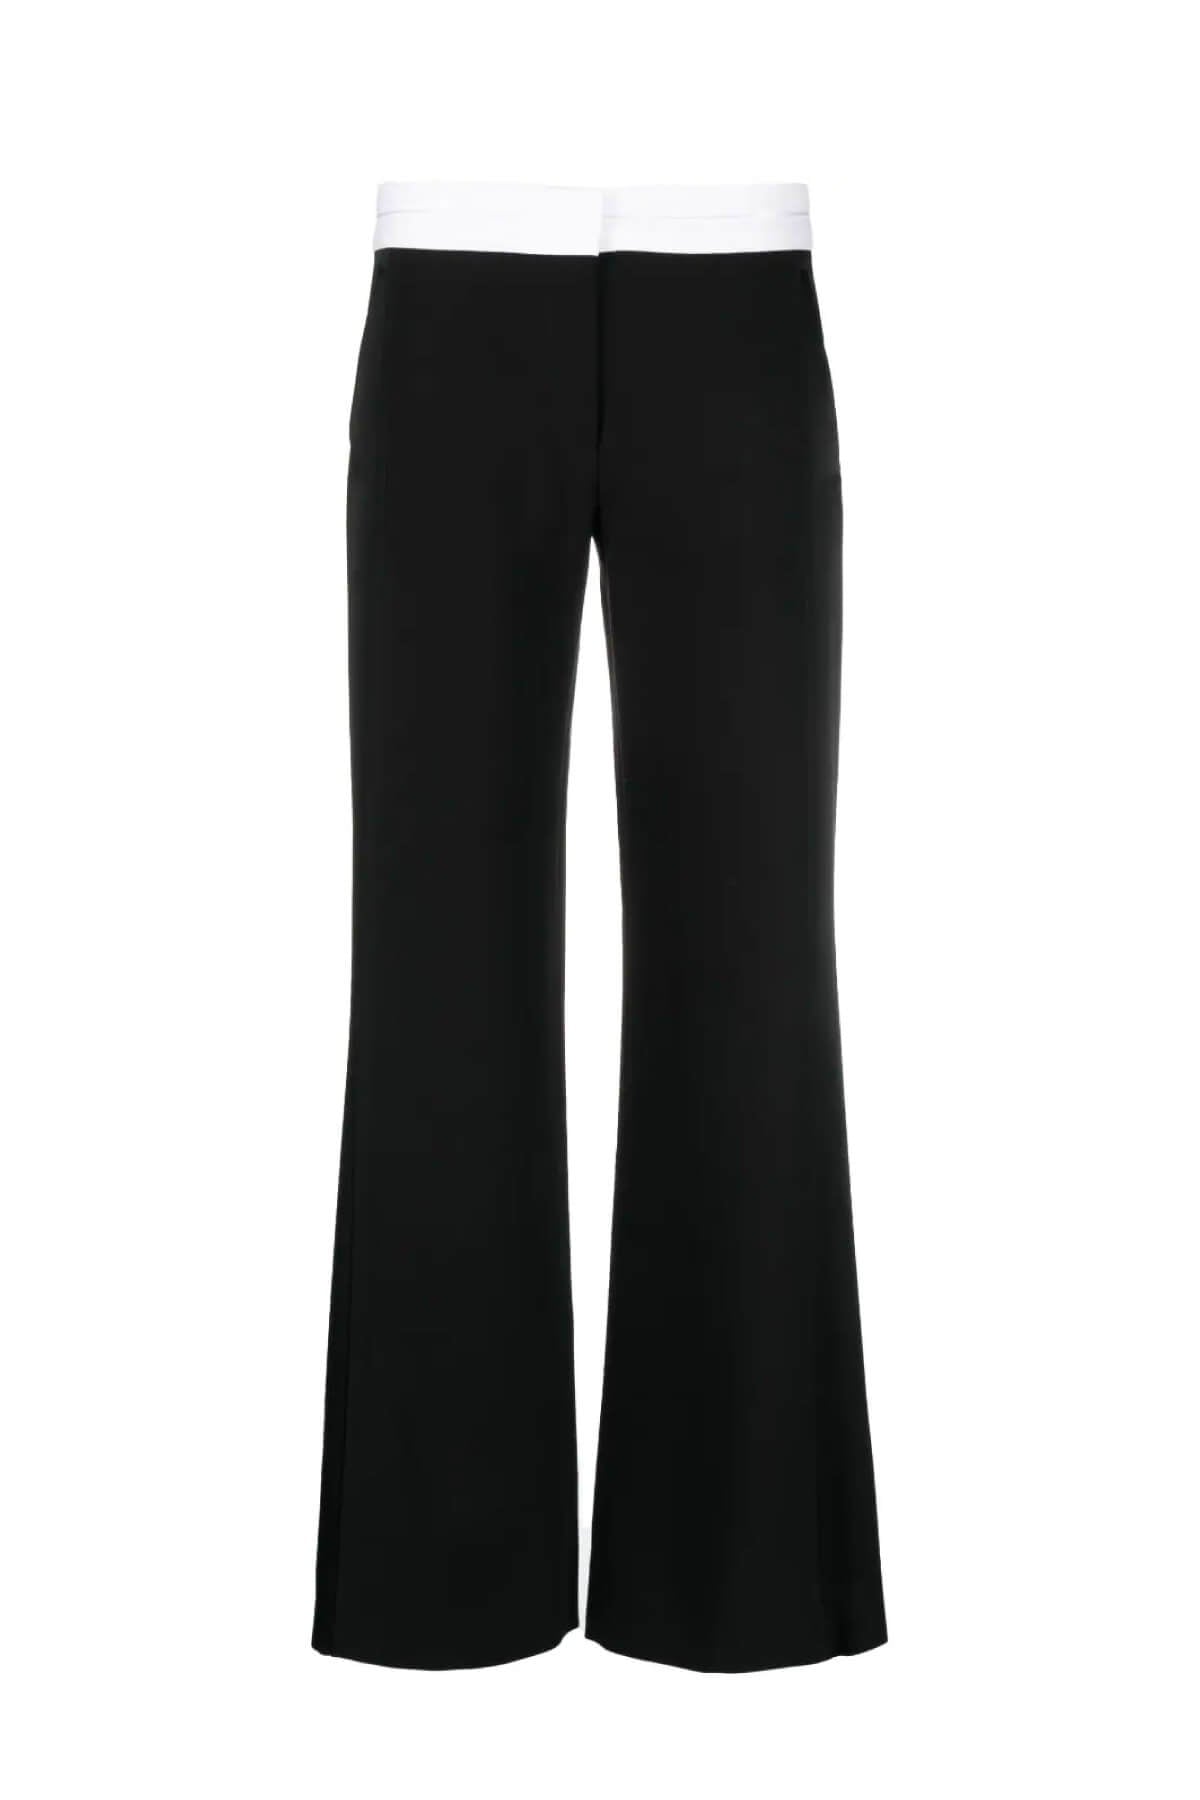 Victoria Beckham Textured Wool Side Panel Trousers - Black